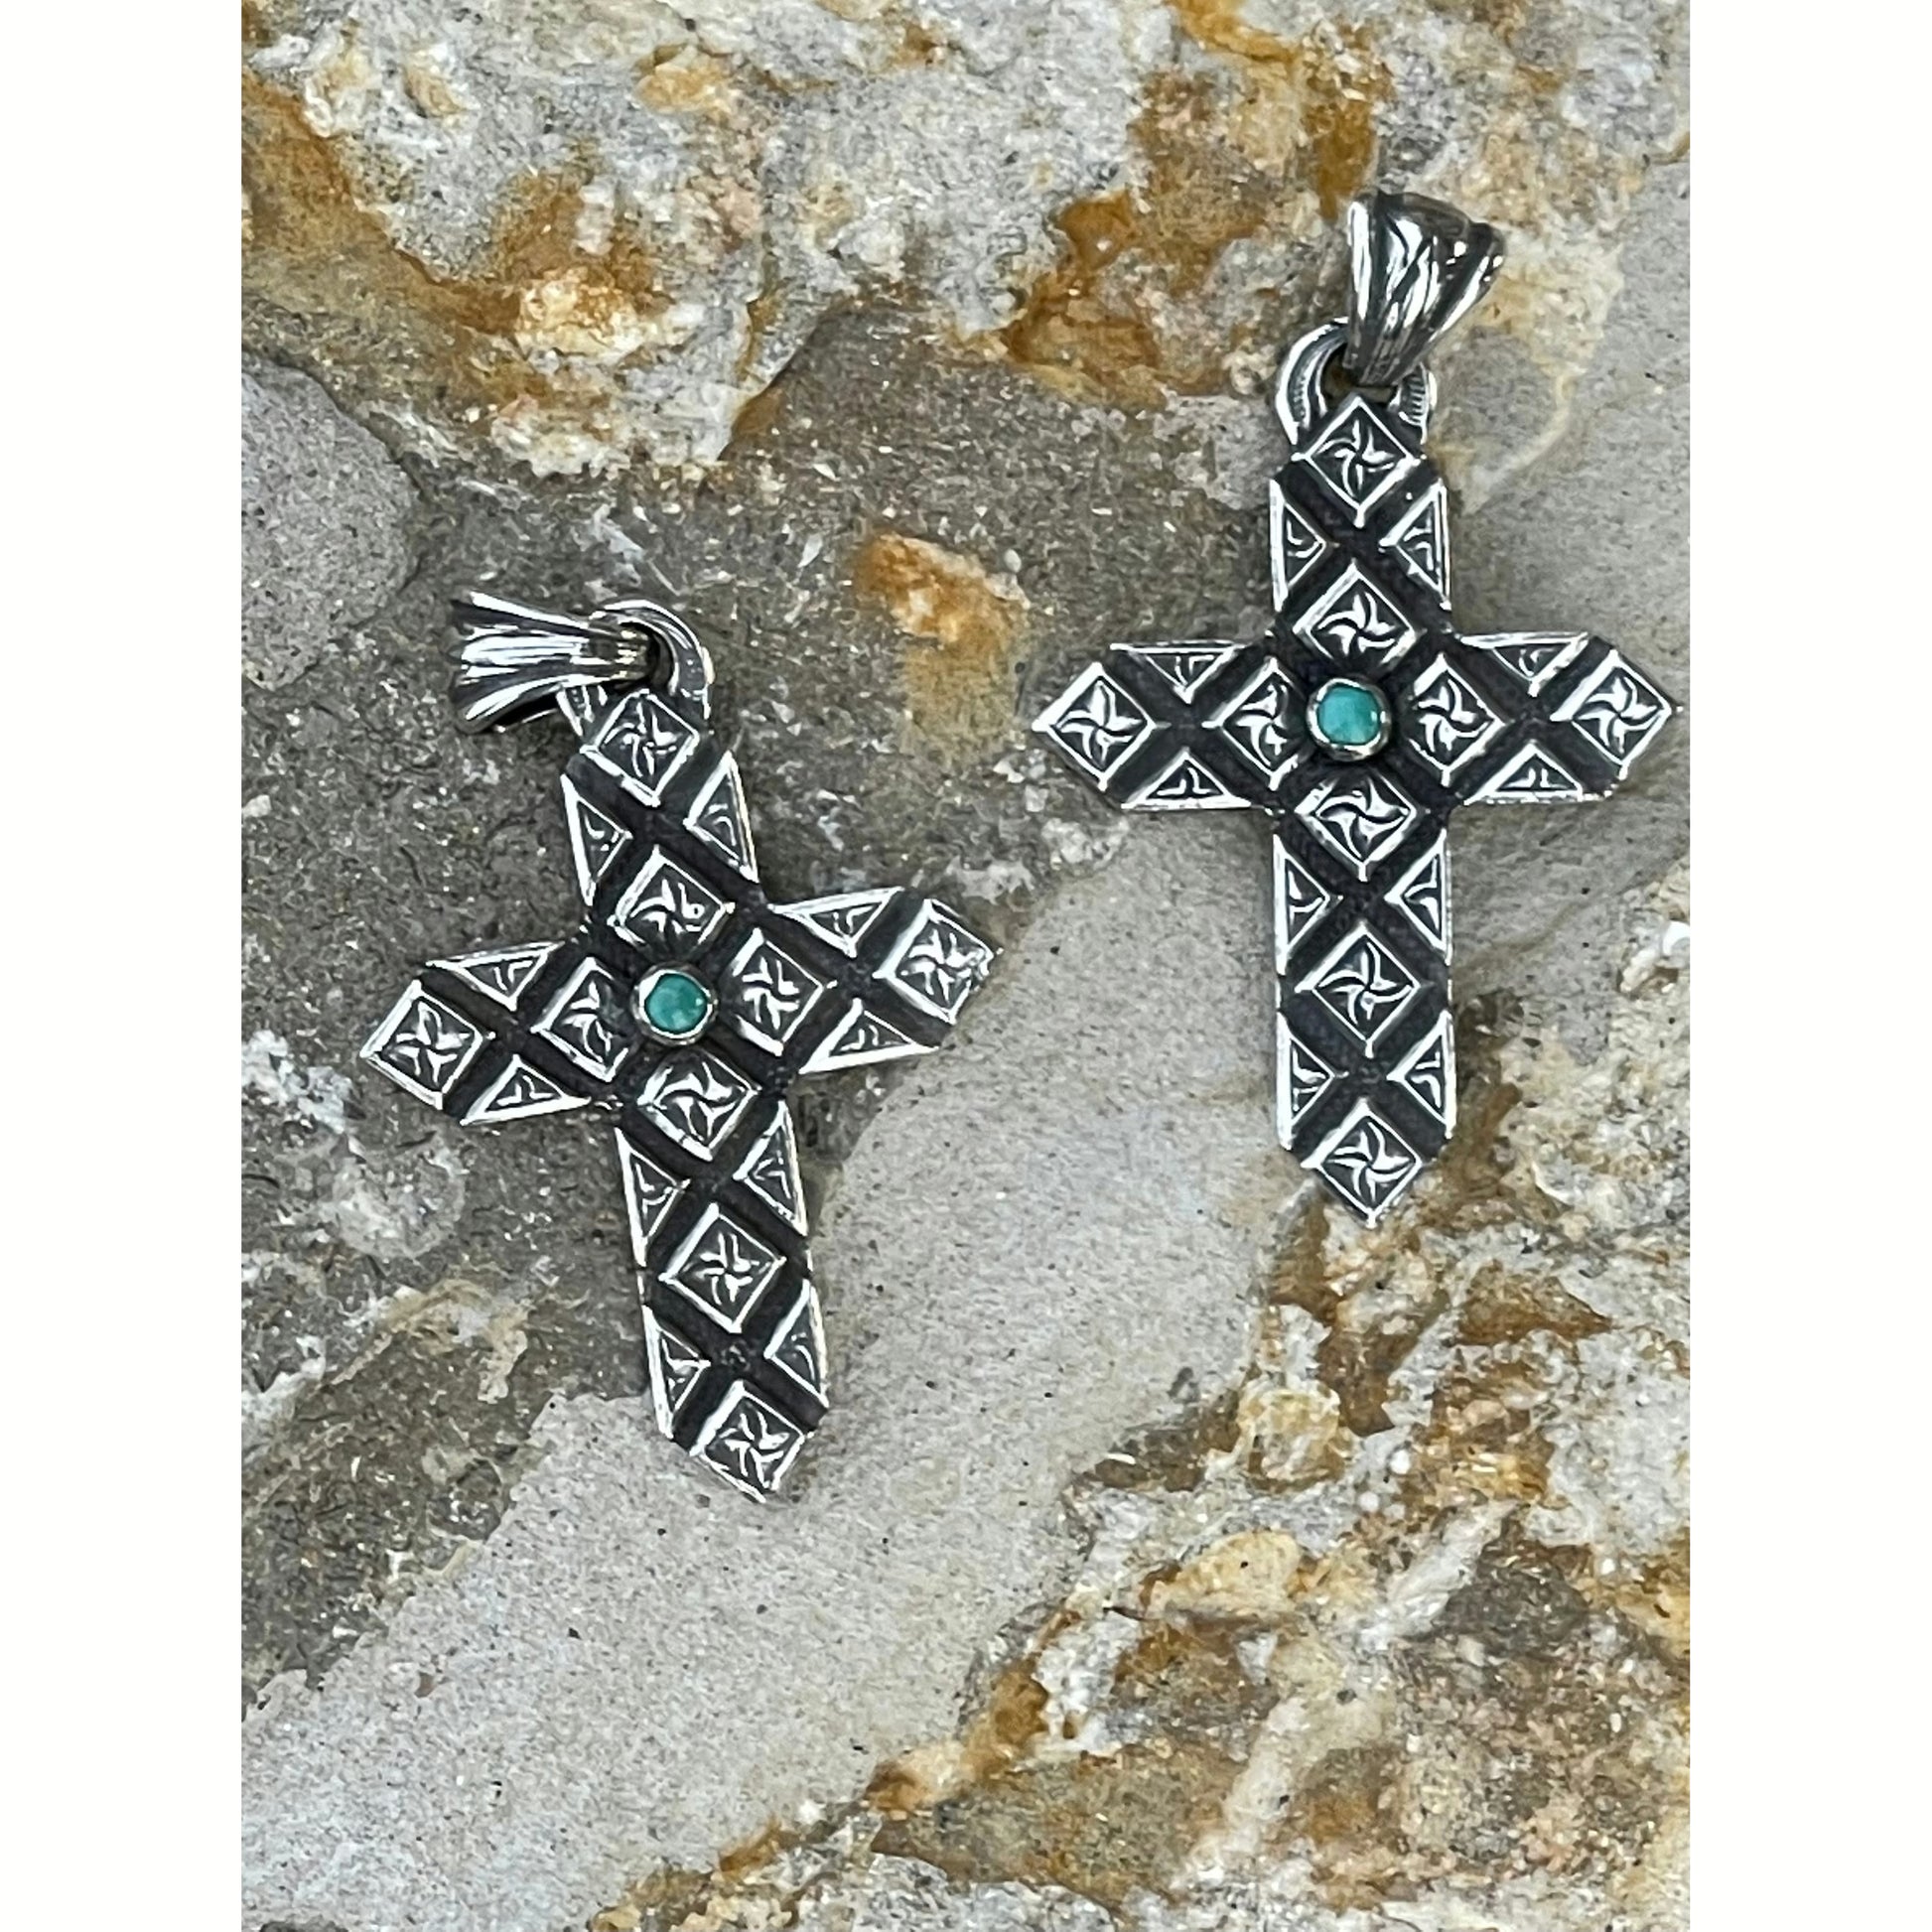 2”x1.5” Sterling Silver handmade diamond cross pendant with small round Kingman turquoise stone set in the middle of the cross finished with a beautiful antiquing. Pendant comes on a 24” wheat chain. 